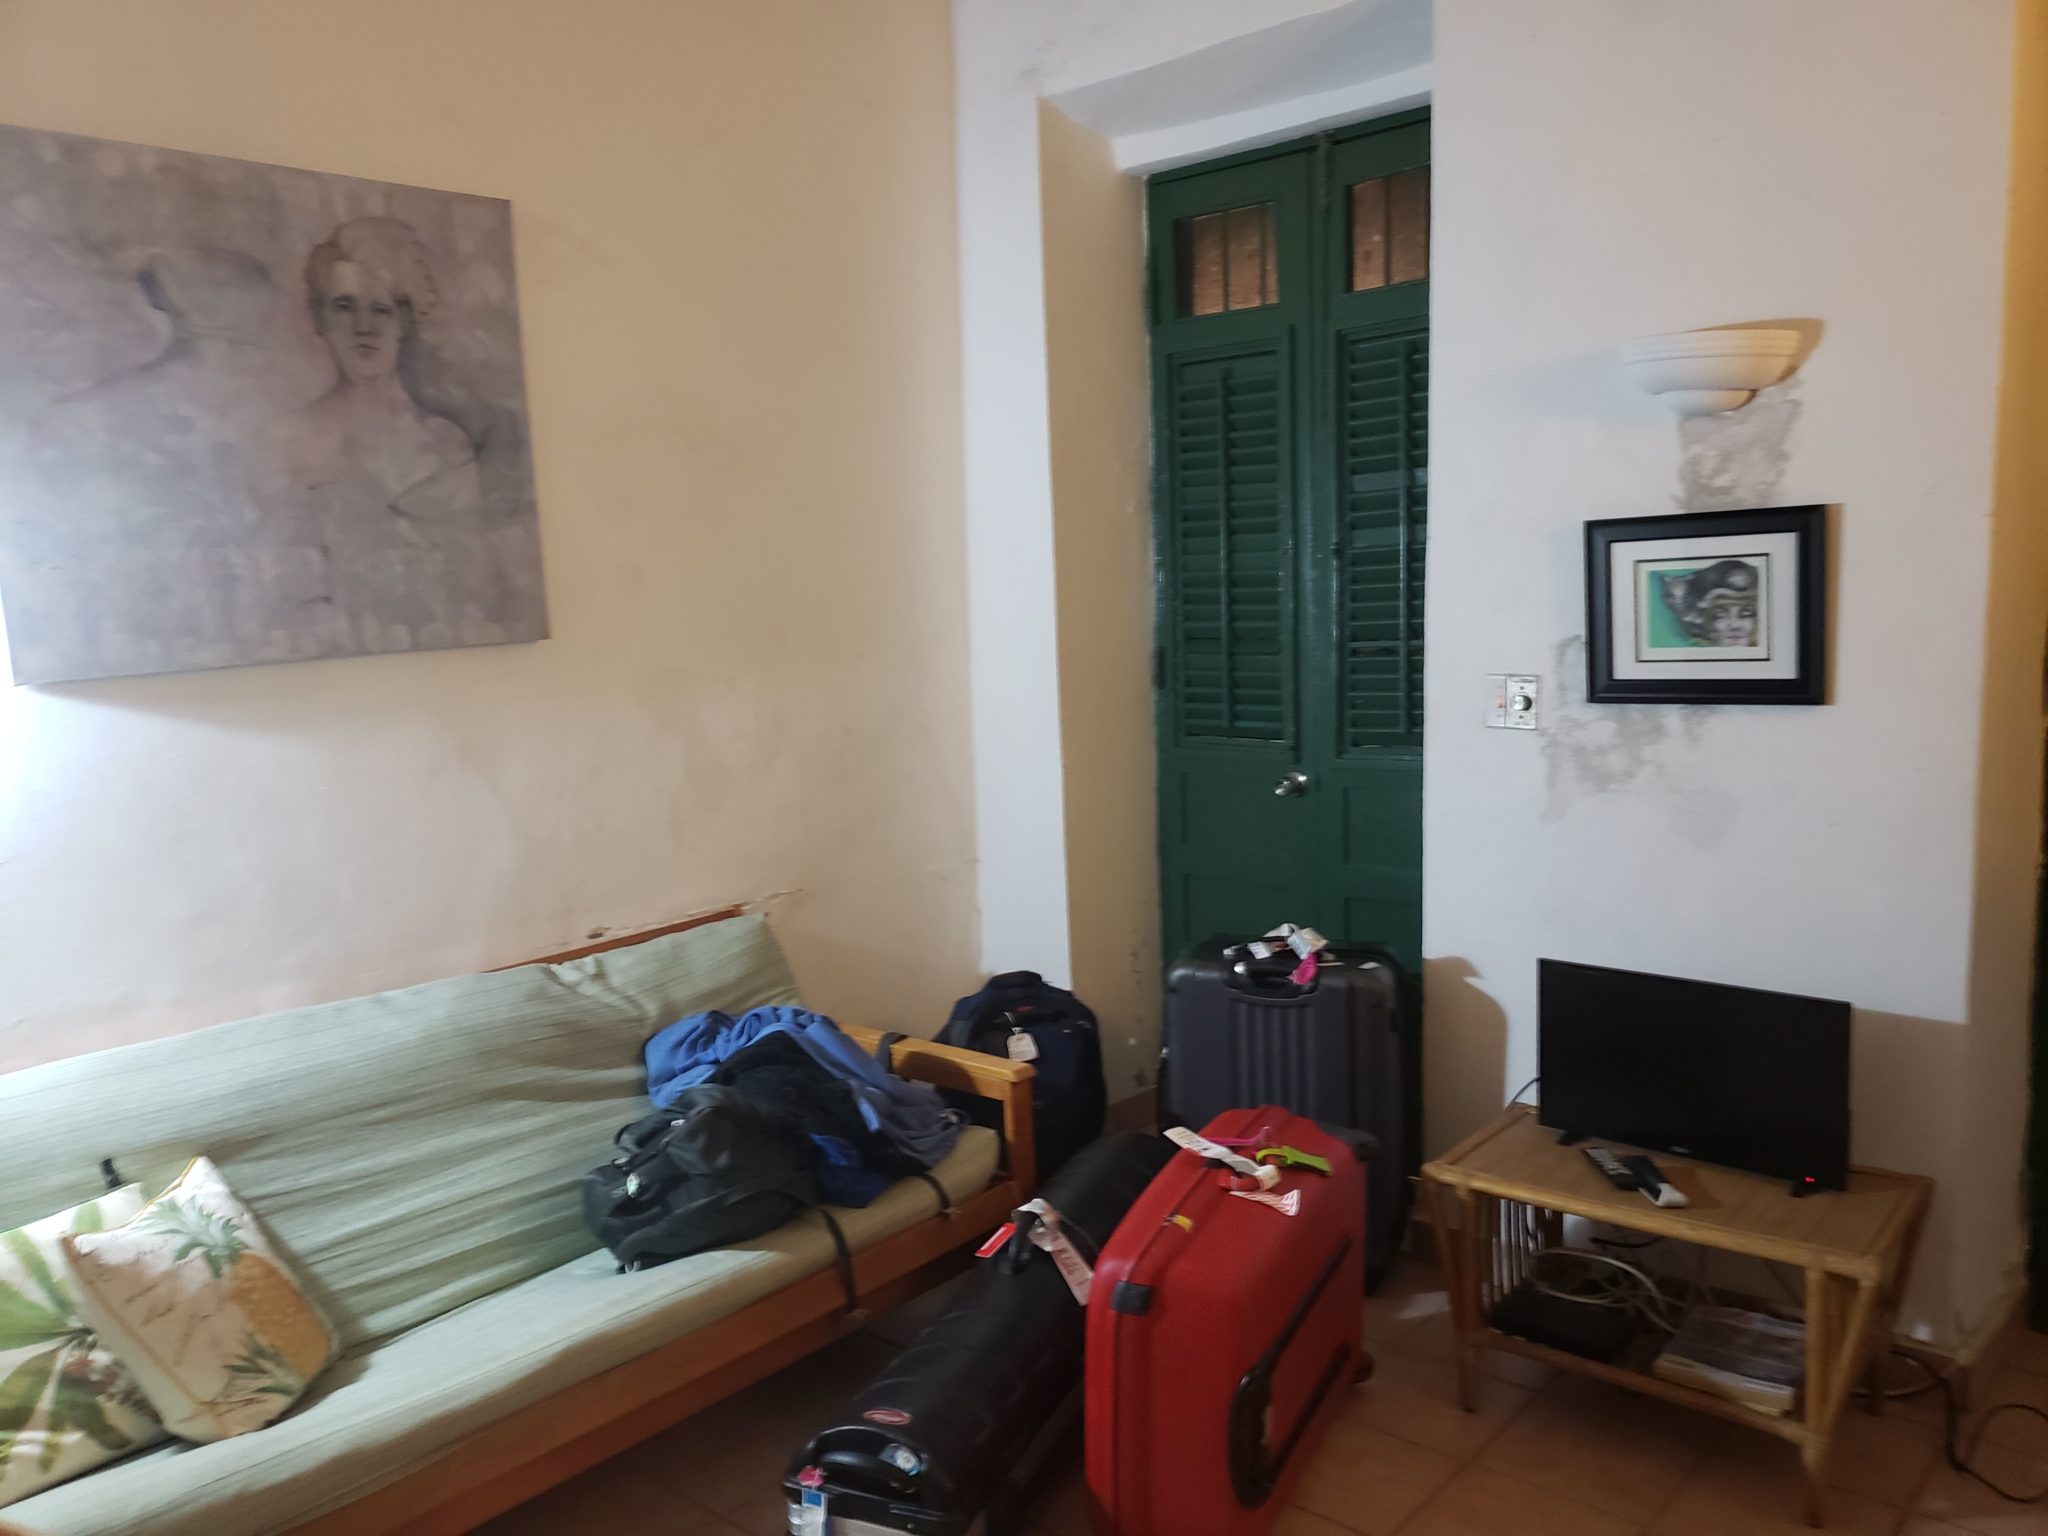 a room with a couch and luggage